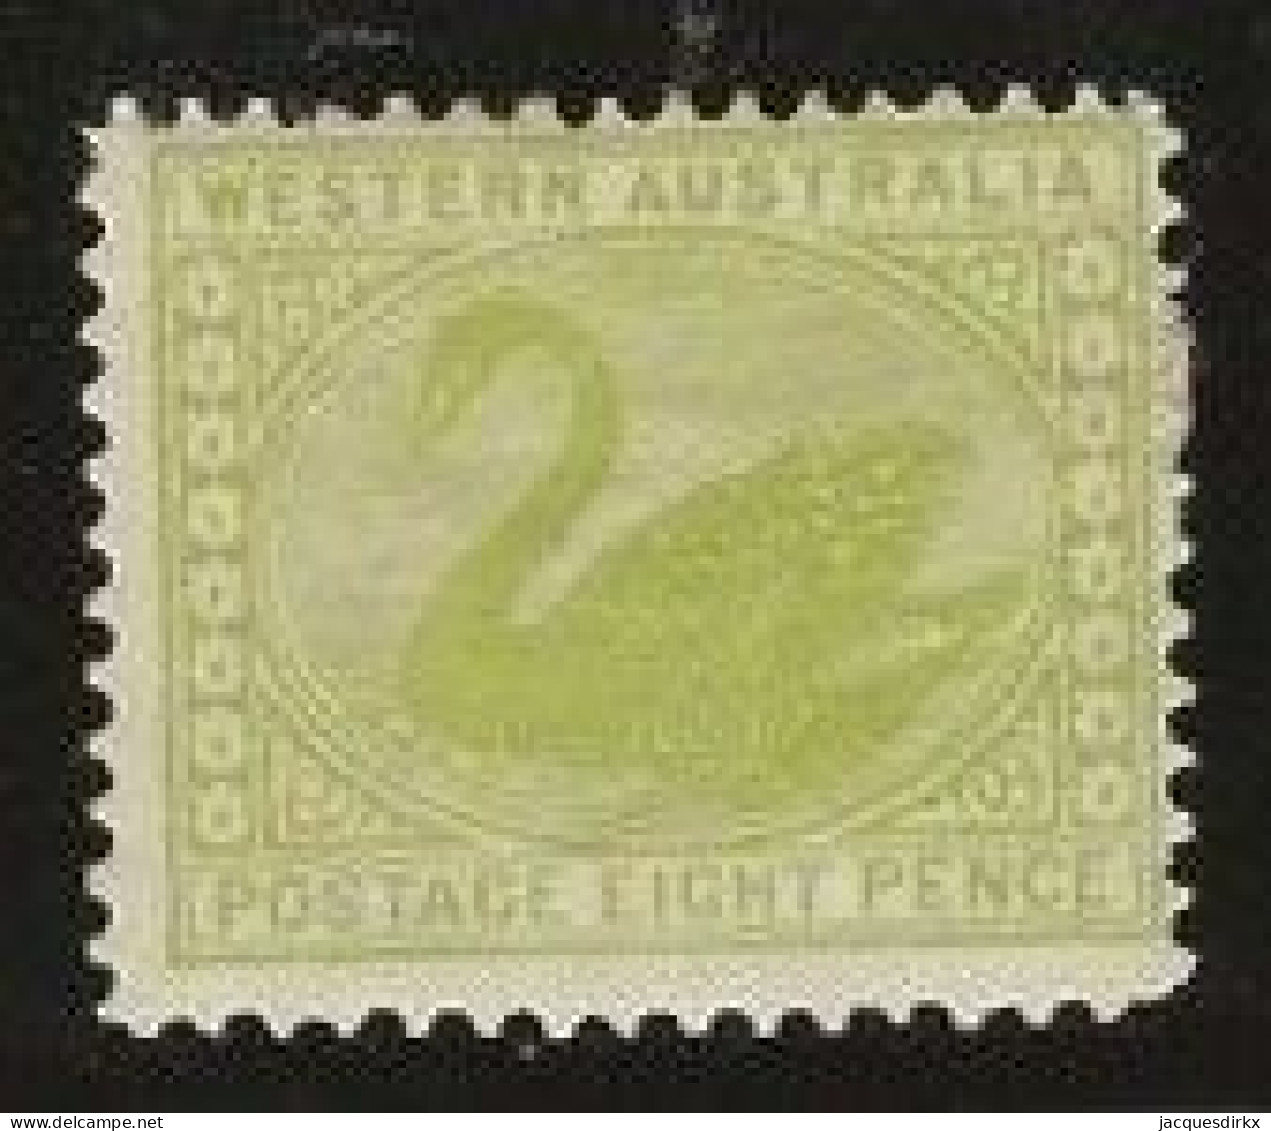 Western Australia     .   SG    .    144       .   *       .     Mint-hinged - Mint Stamps